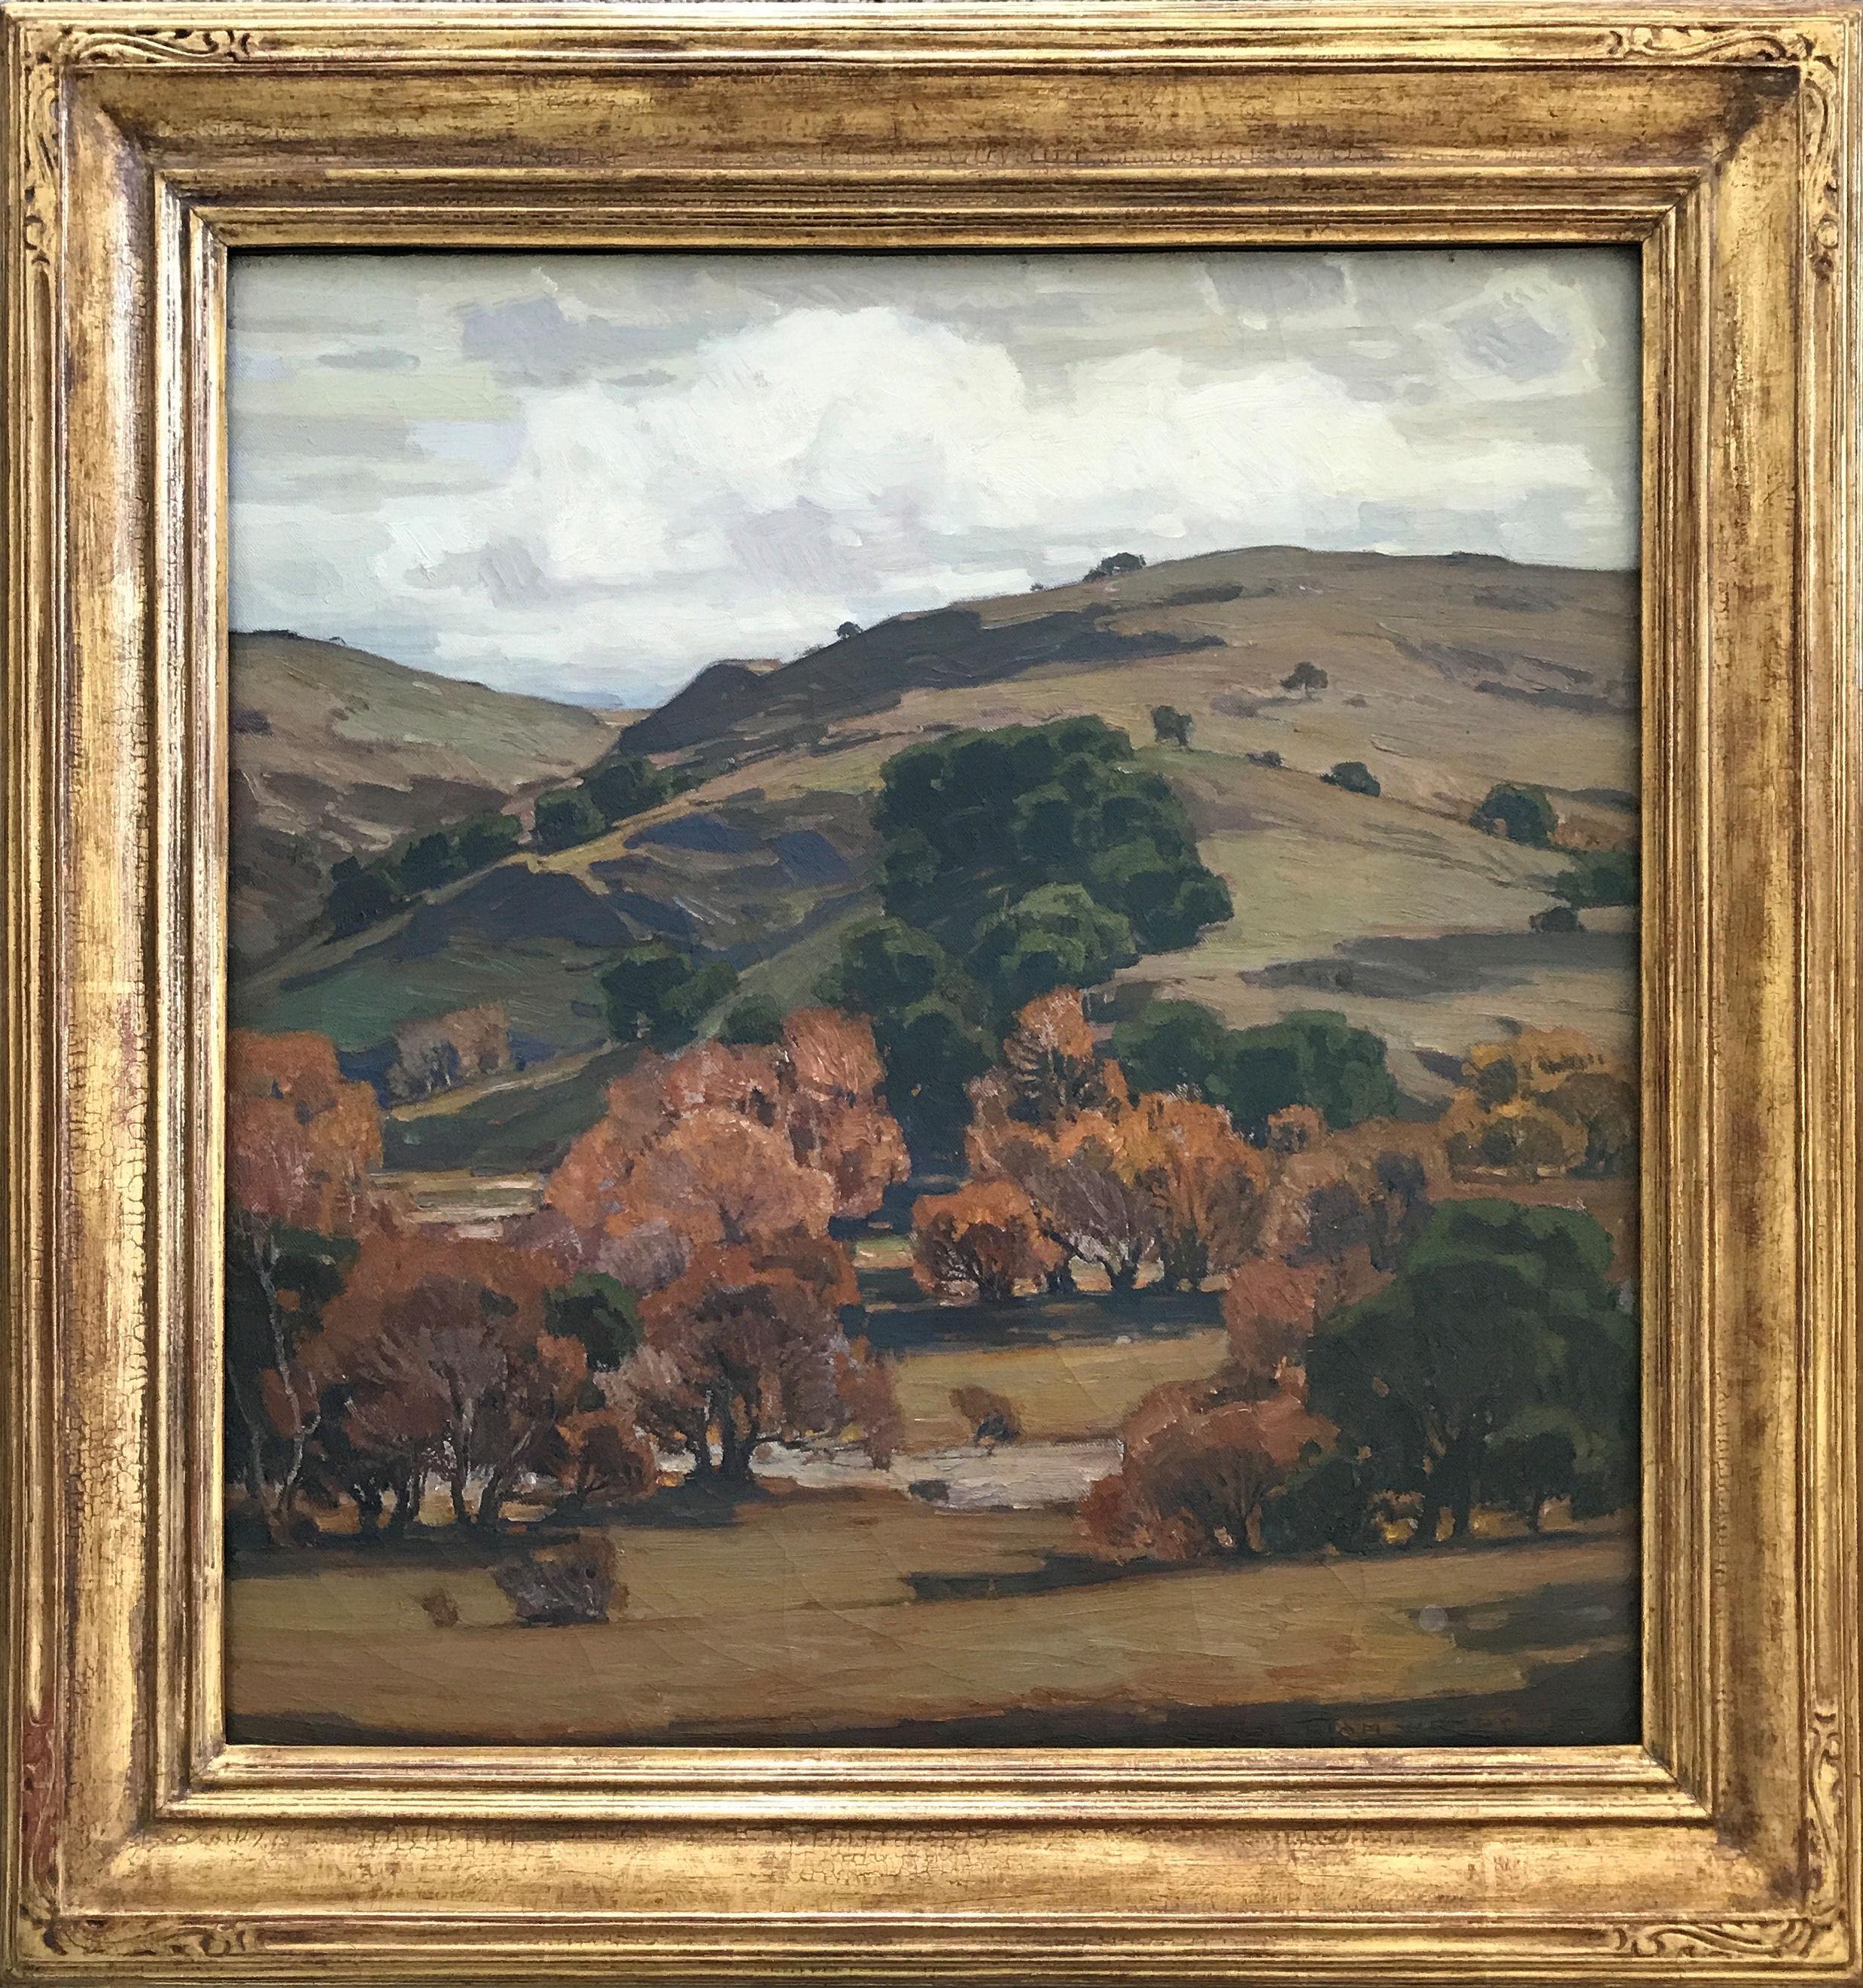 This iconic landscape is by William Wendt (1865 - 1946) who along with Granville Redmond is considered California’s most important impressionist landscape painter of the early 20th century. The autumnal scene is likely located in Orange County,